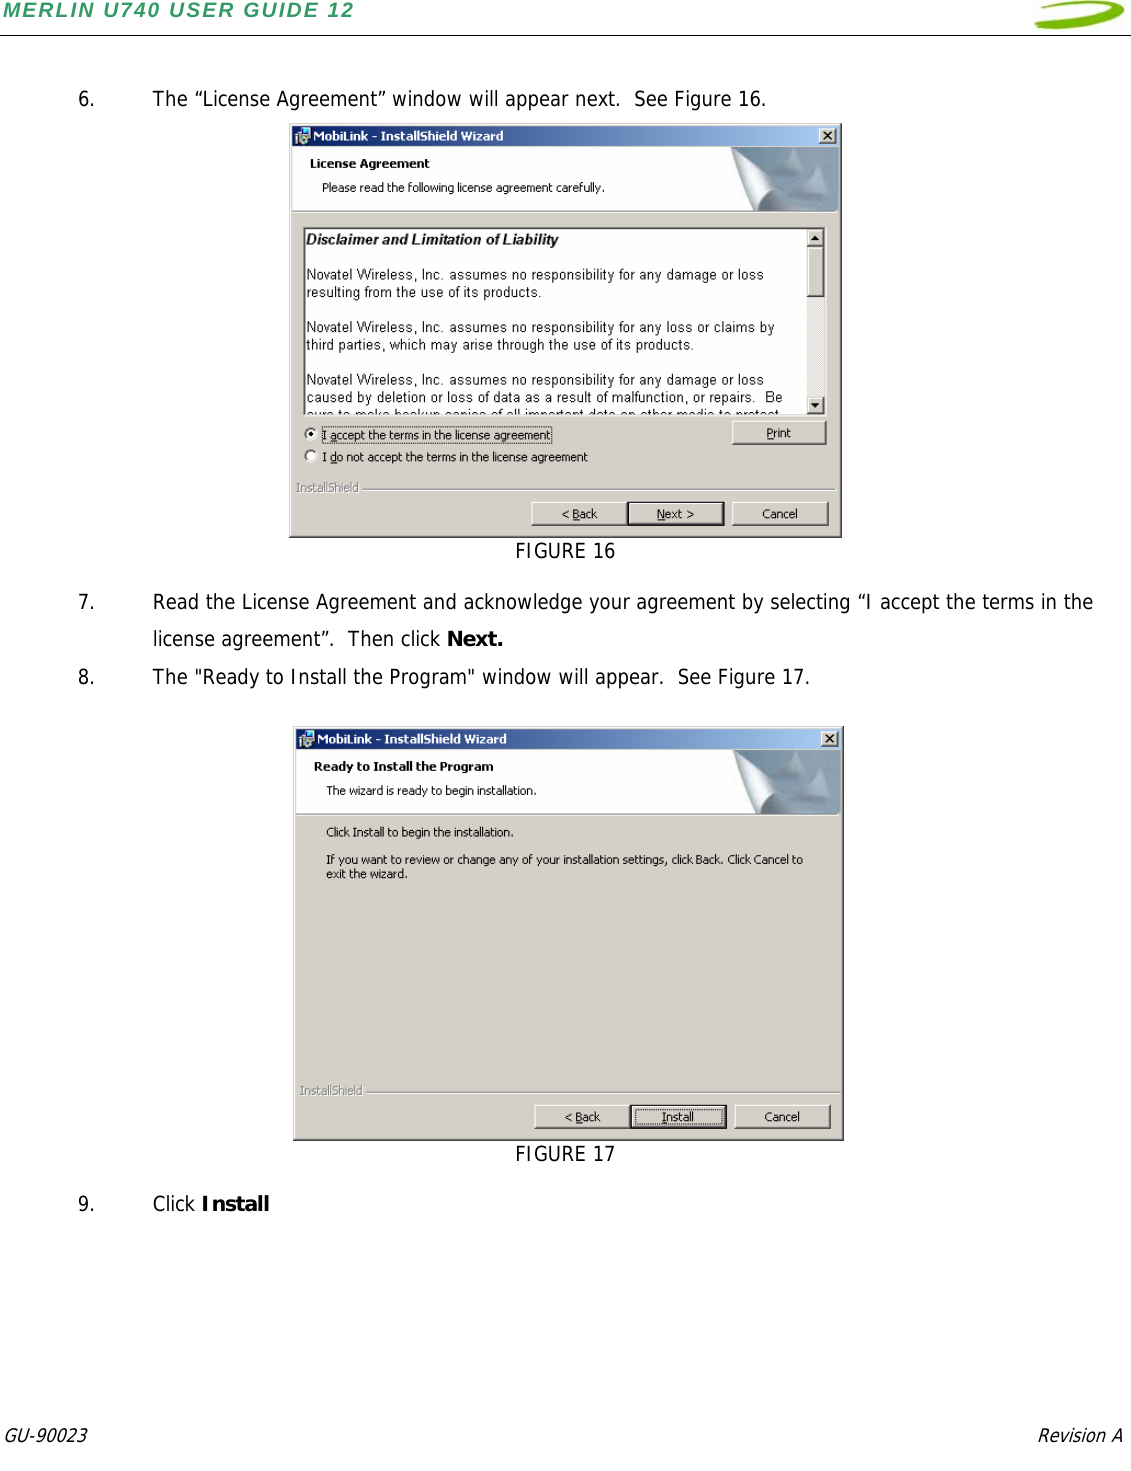 MERLIN U740 USER GUIDE 12  GU-90023            Revision A    6. The “License Agreement” window will appear next.  See Figure 16.  FIGURE 16  7. Read the License Agreement and acknowledge your agreement by selecting “I accept the terms in the license agreement”.  Then click Next. 8. The &quot;Ready to Install the Program&quot; window will appear.  See Figure 17.     FIGURE 17  9. Click Install 